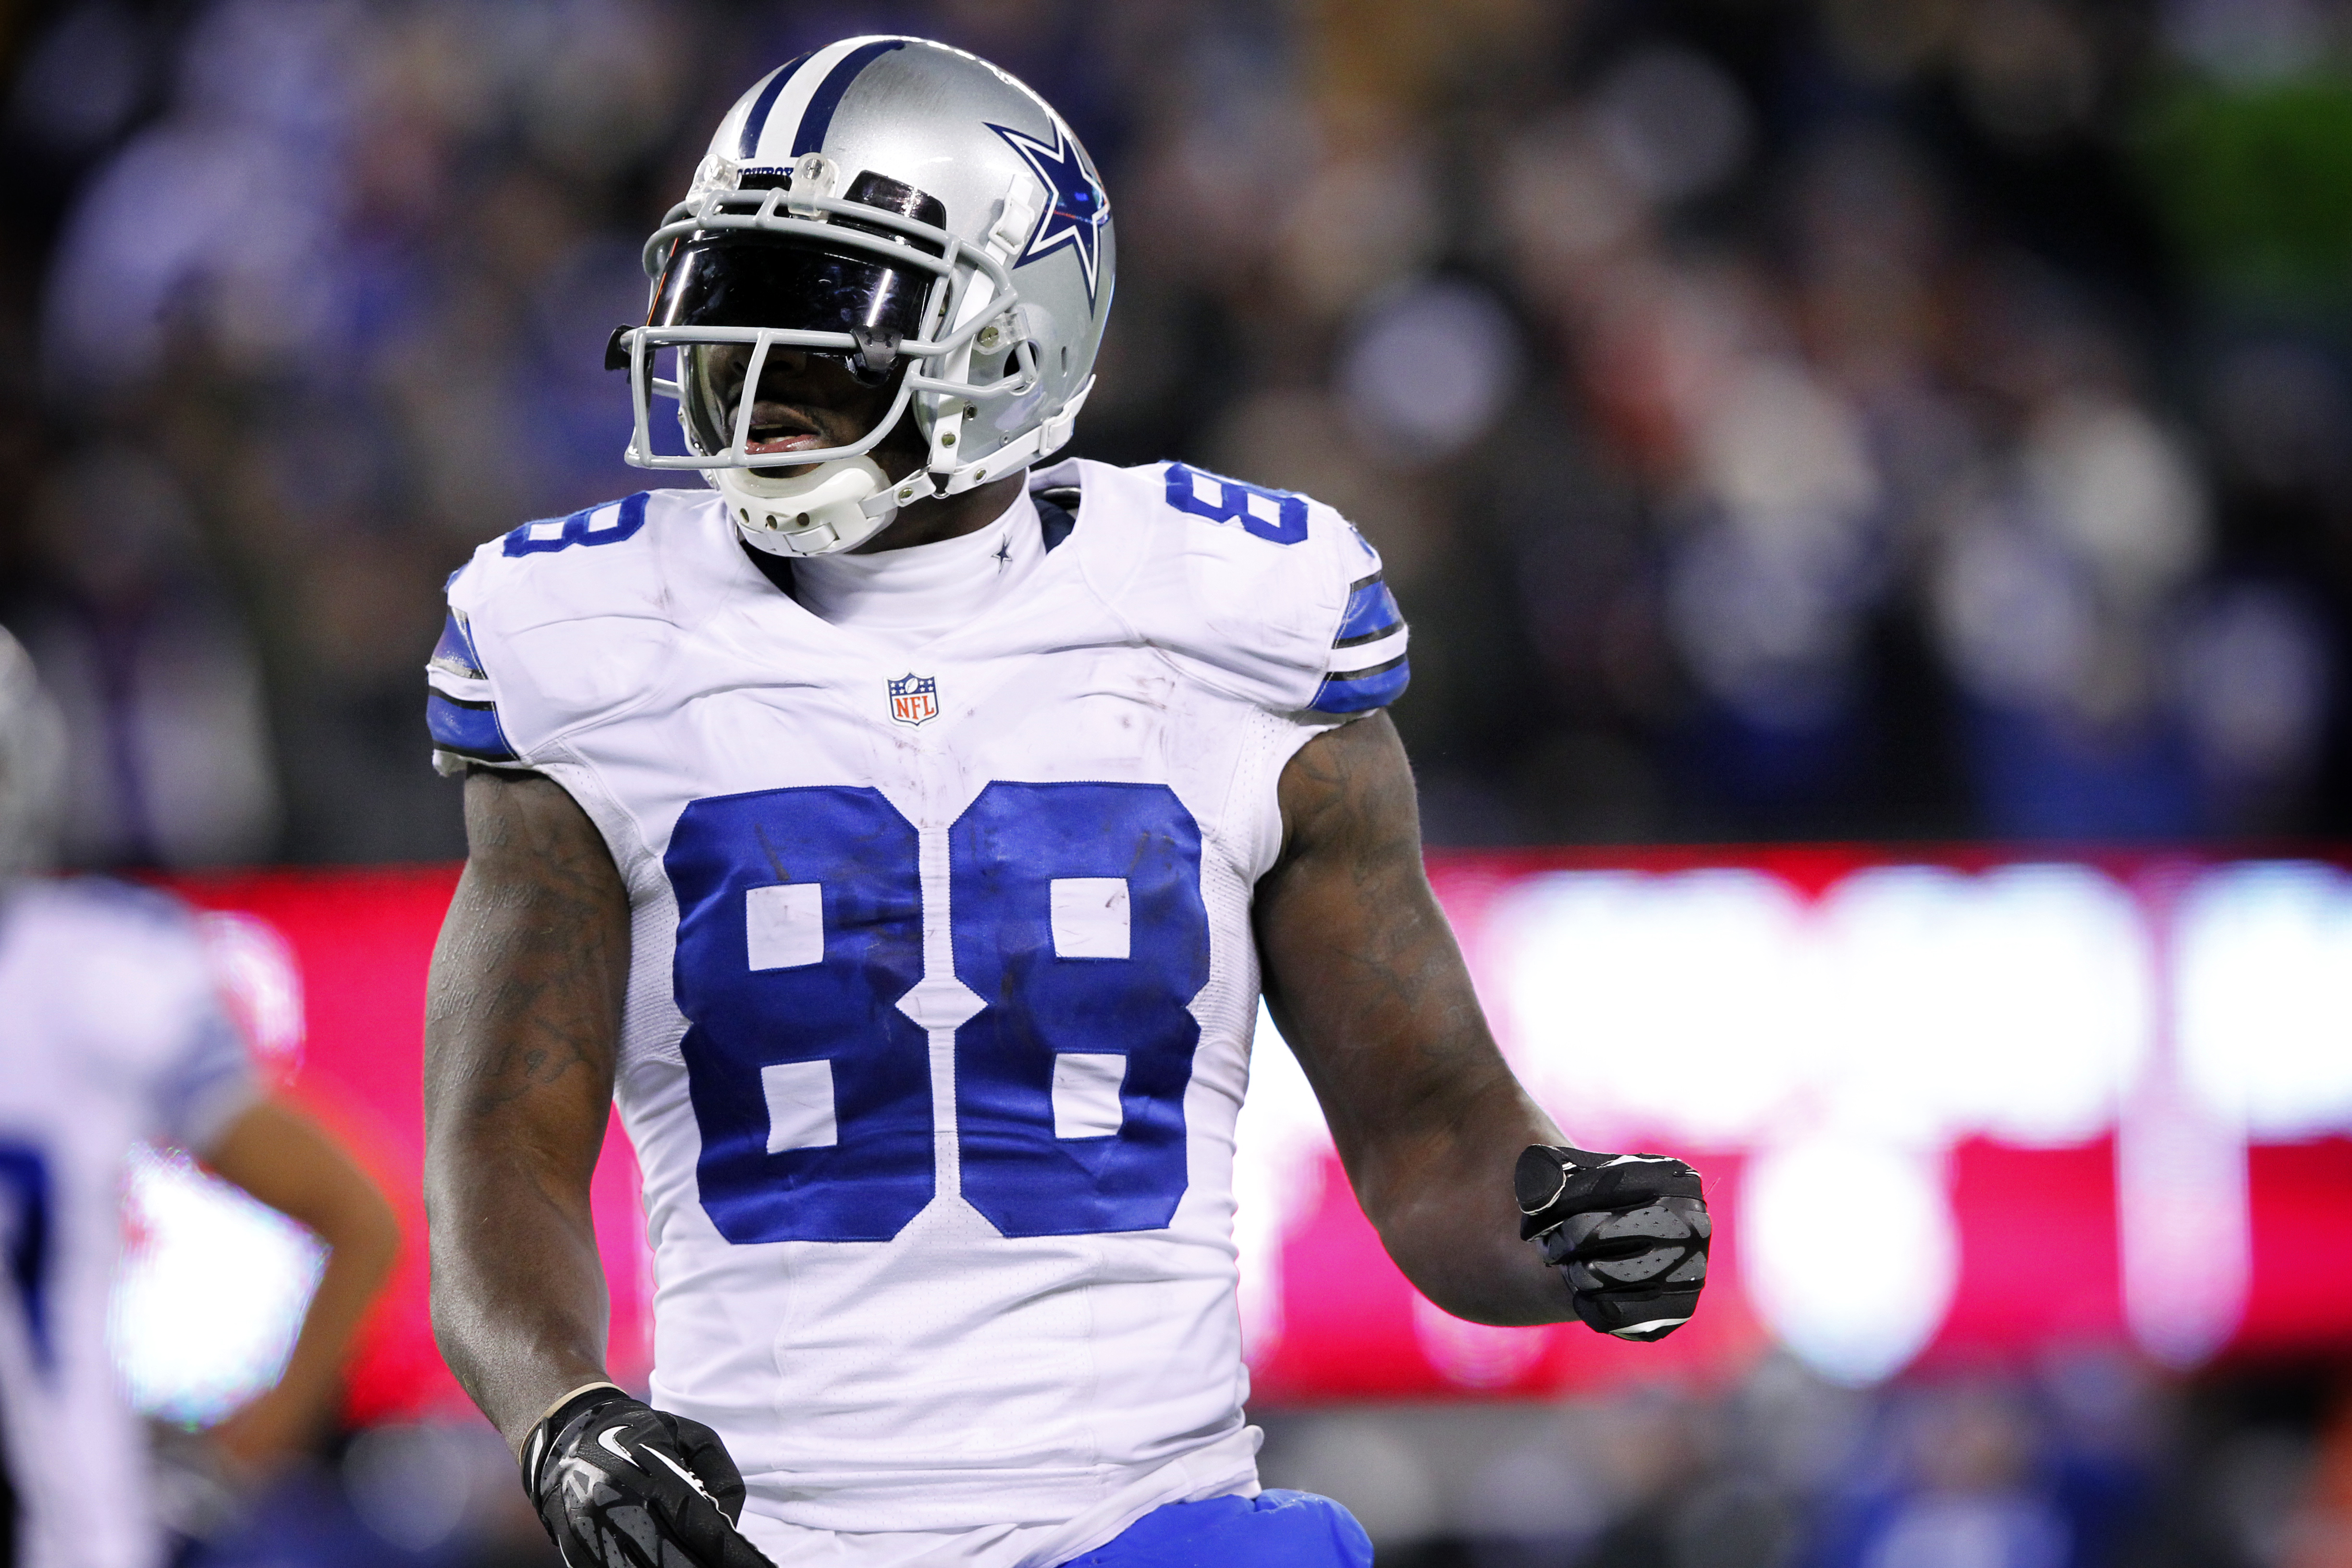 Pro Bowl draft: Dez Bryant goes to Team Sanders, DeMarco Murray to Team Rice